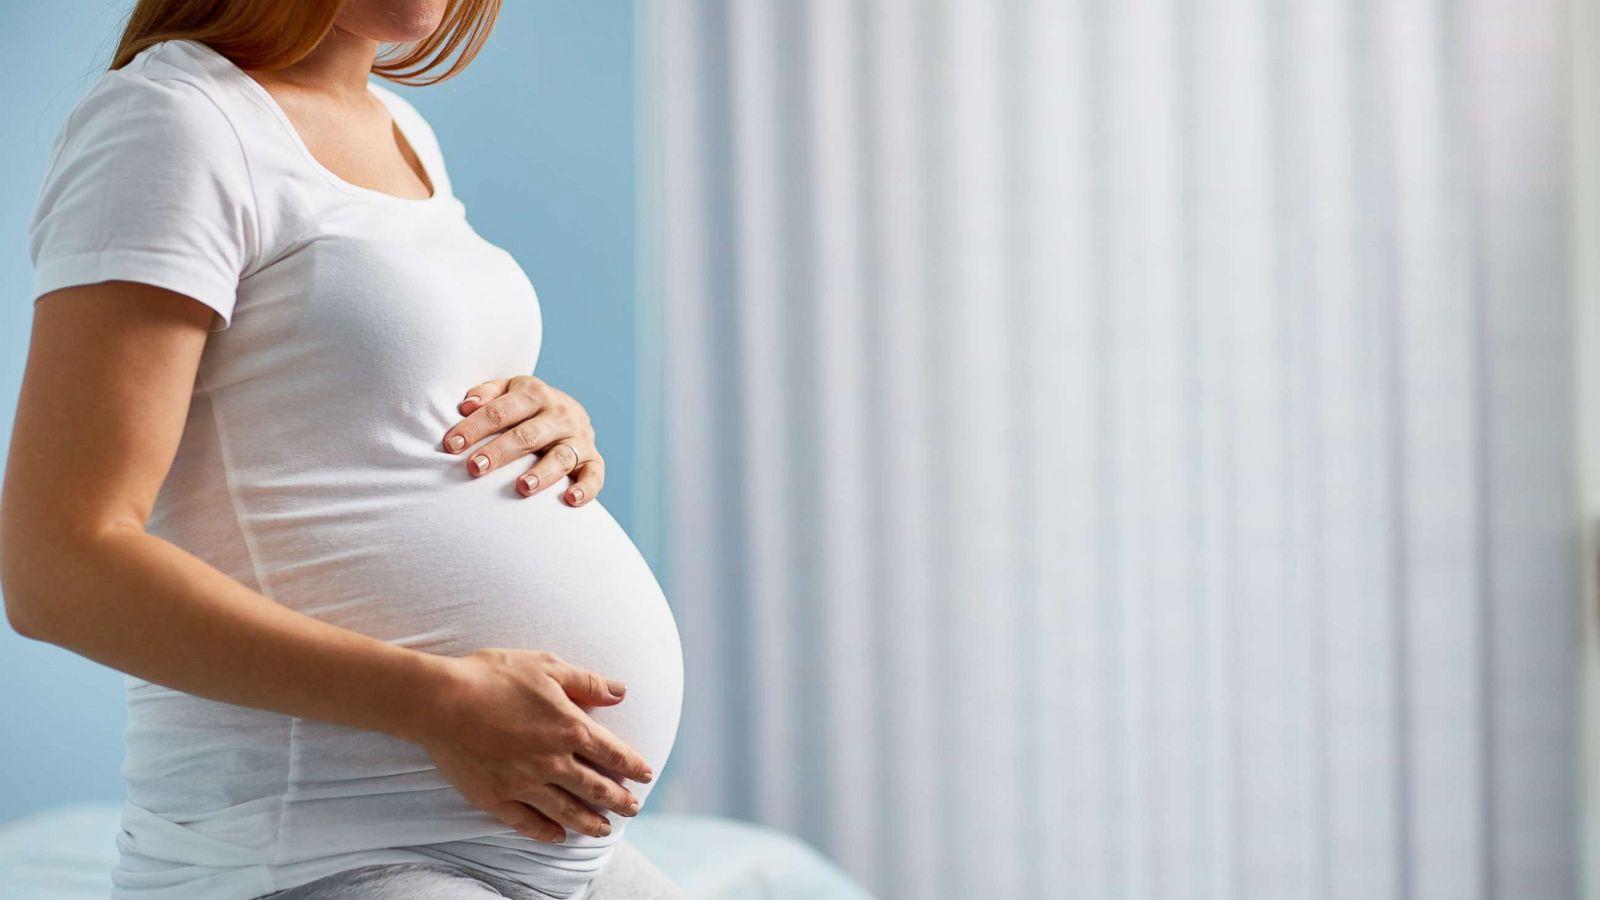 Many pregnant women are being prescribed potentially